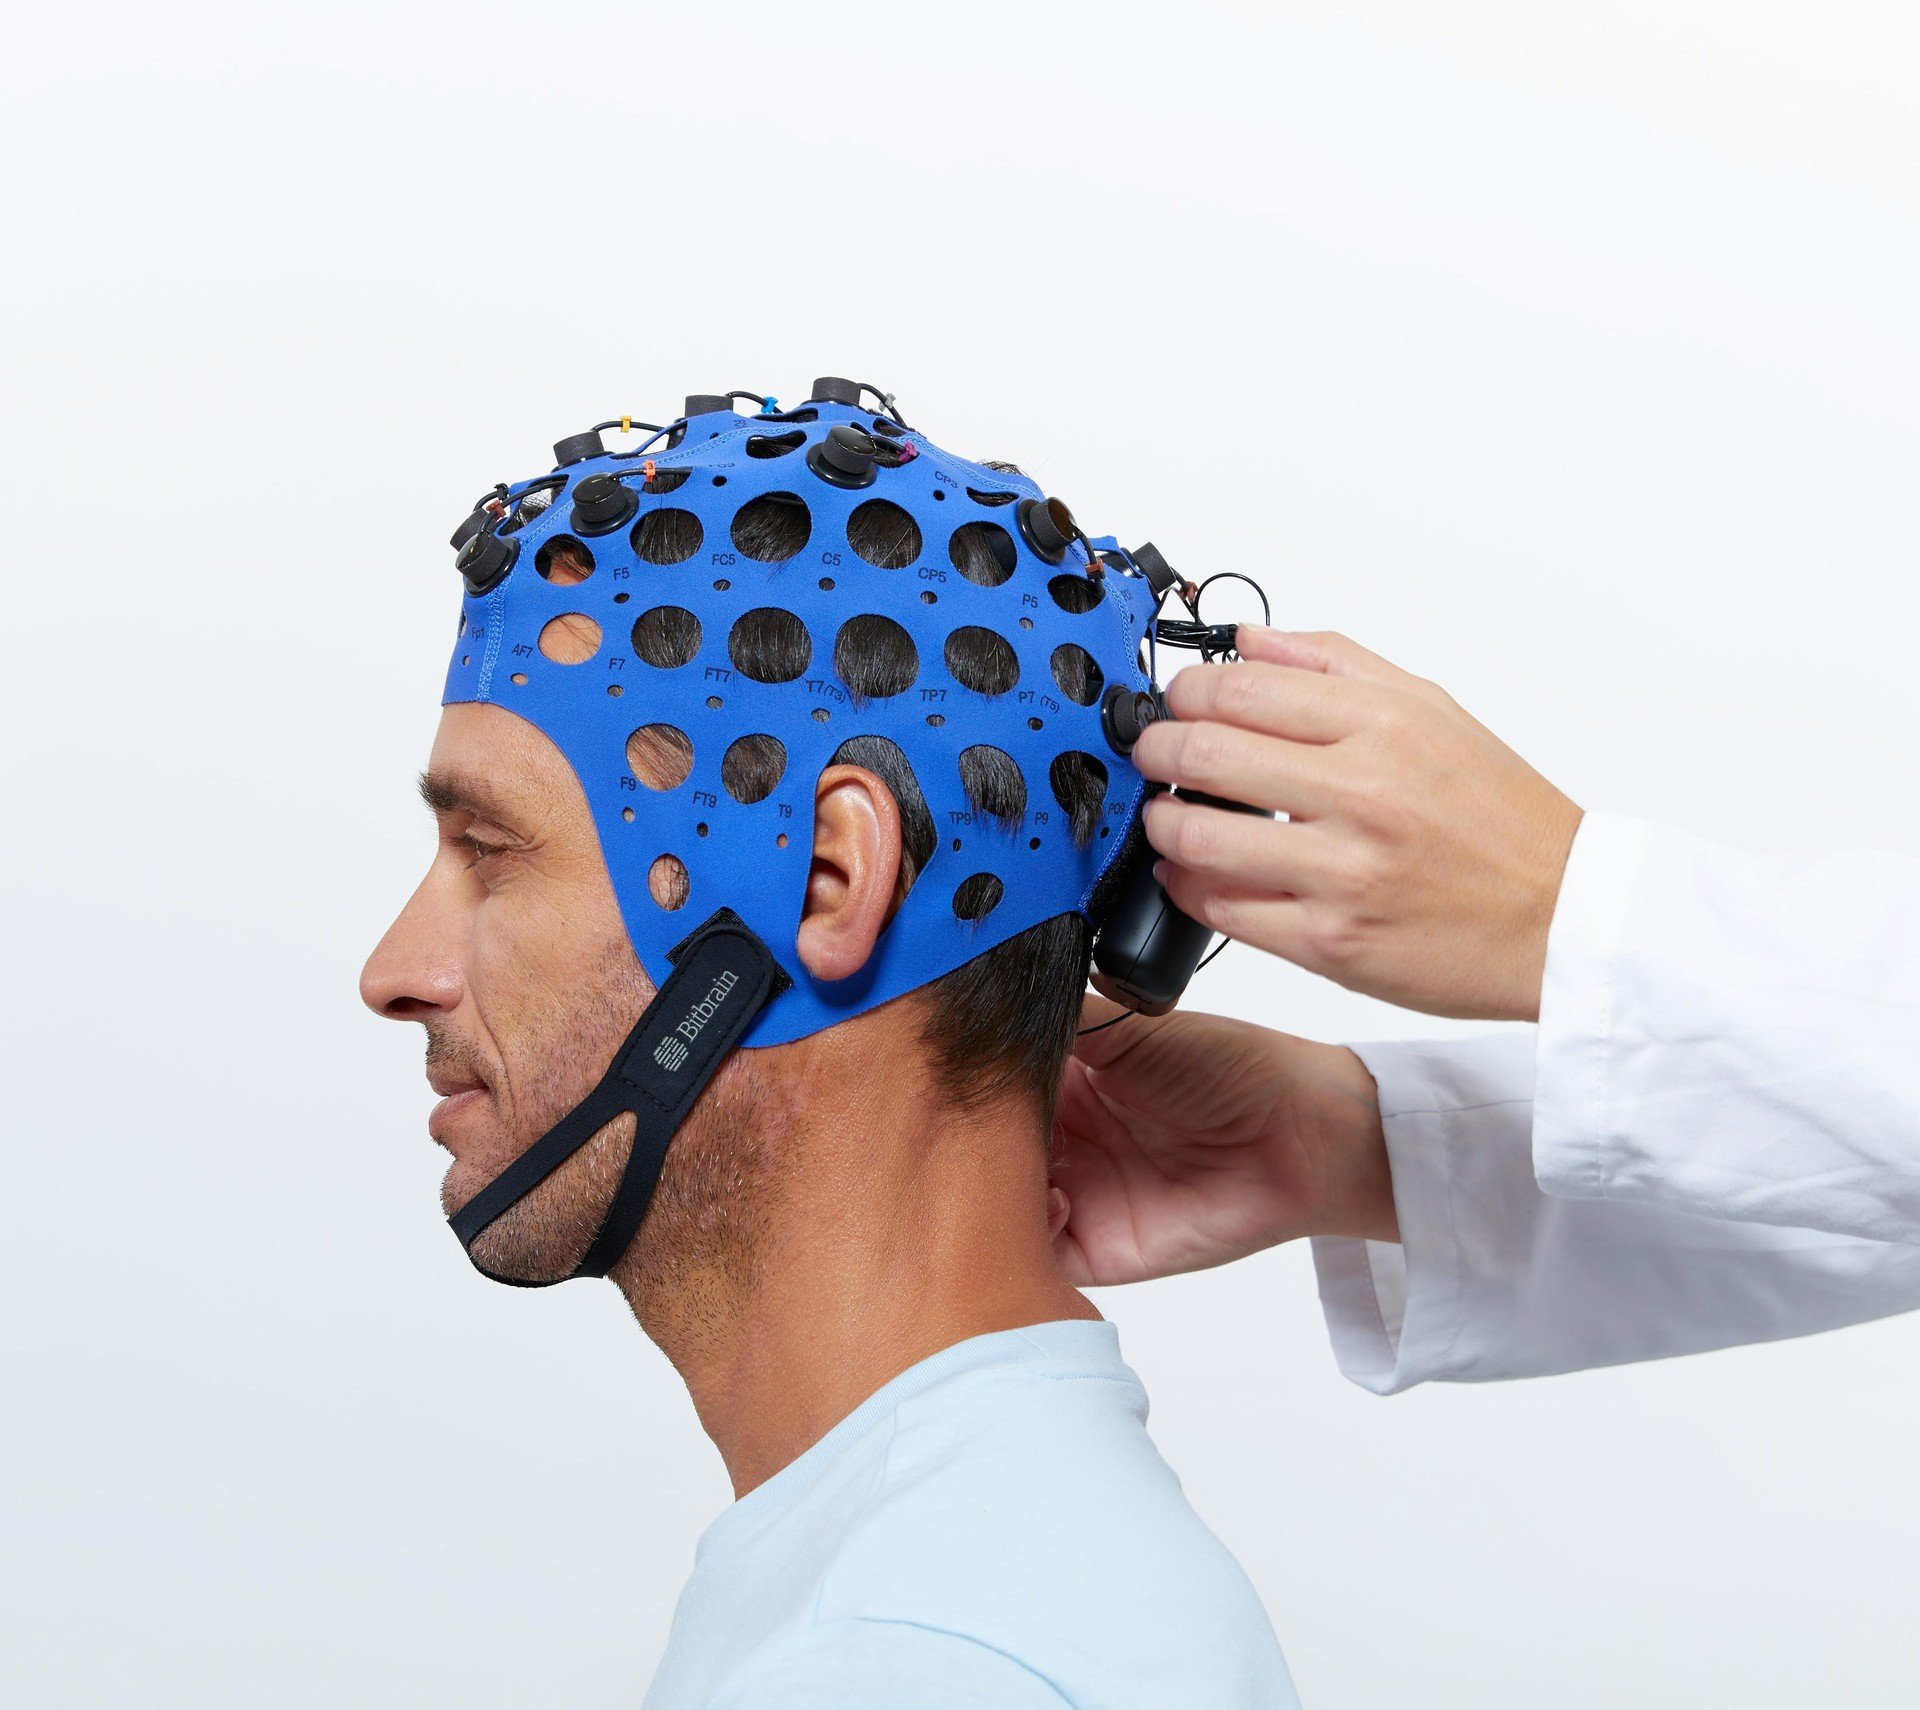 What is EEG and what is it used for?